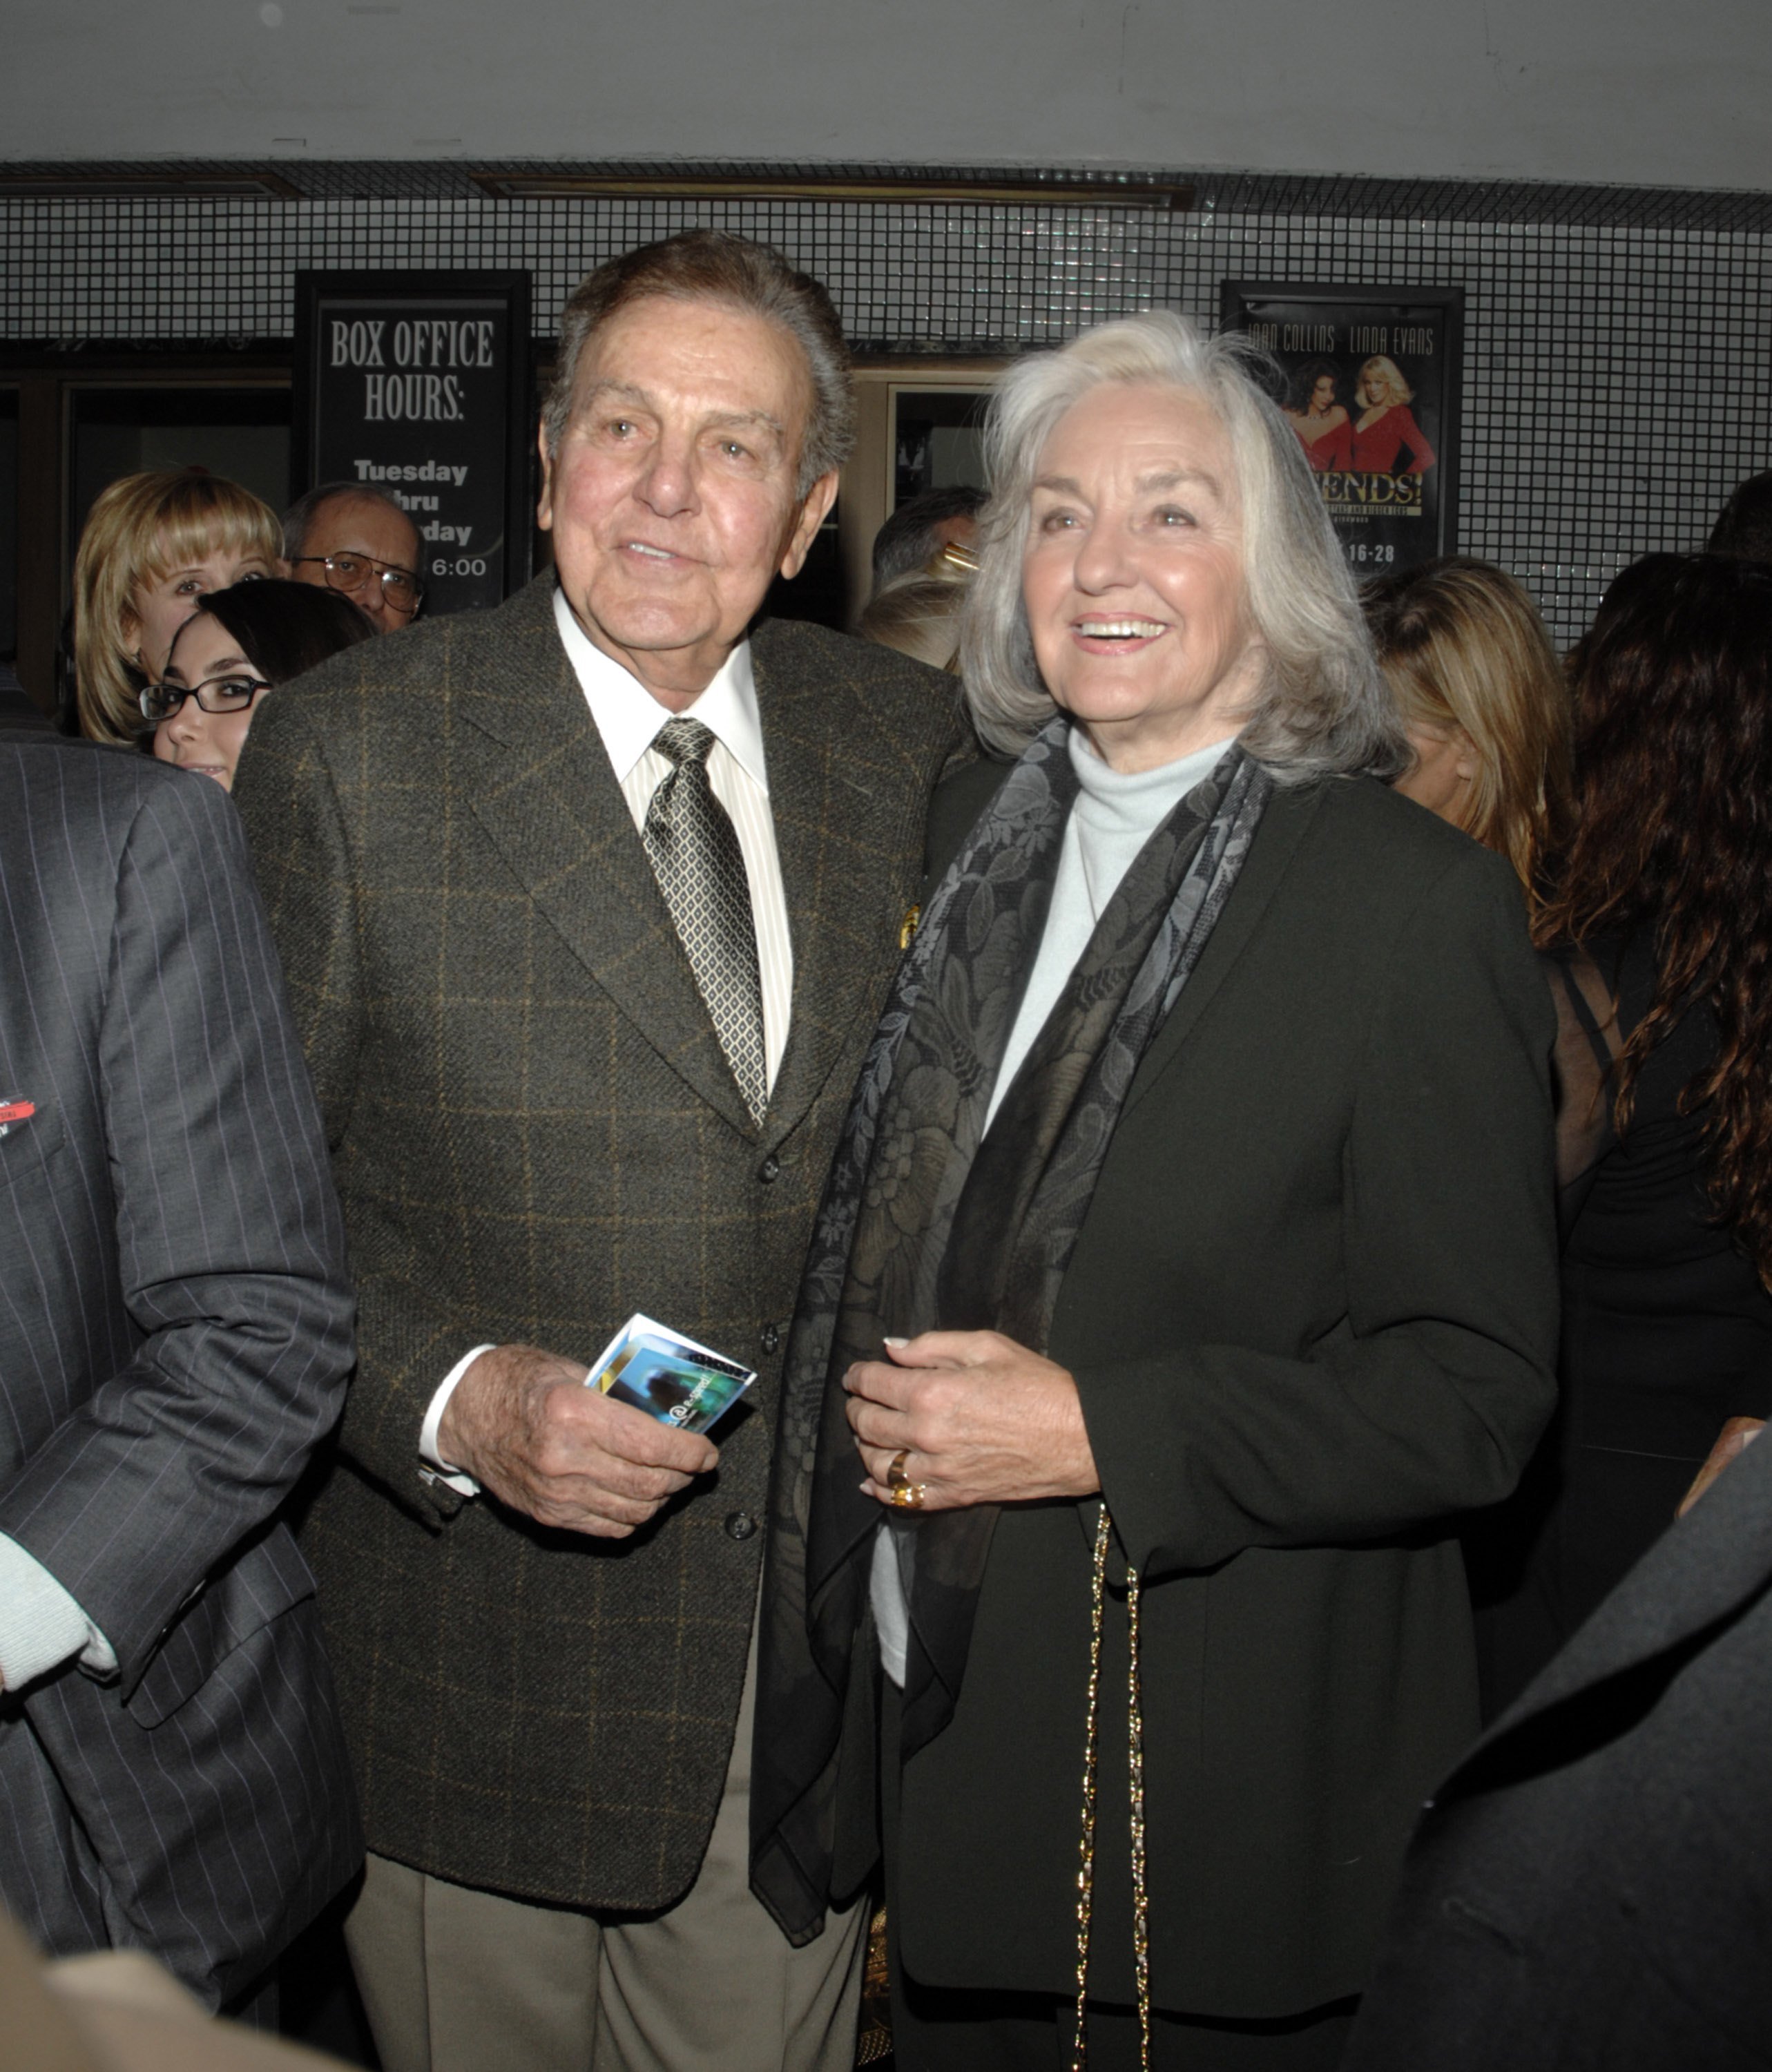 Mike Connors and Mary Lou Wiley attend the premiere performance of Joan Collins and Linda Evans in "Legends" on January 16, 2007 at the Wlishire Theater in Beverly Hills, California.  |  Source: Getty Images